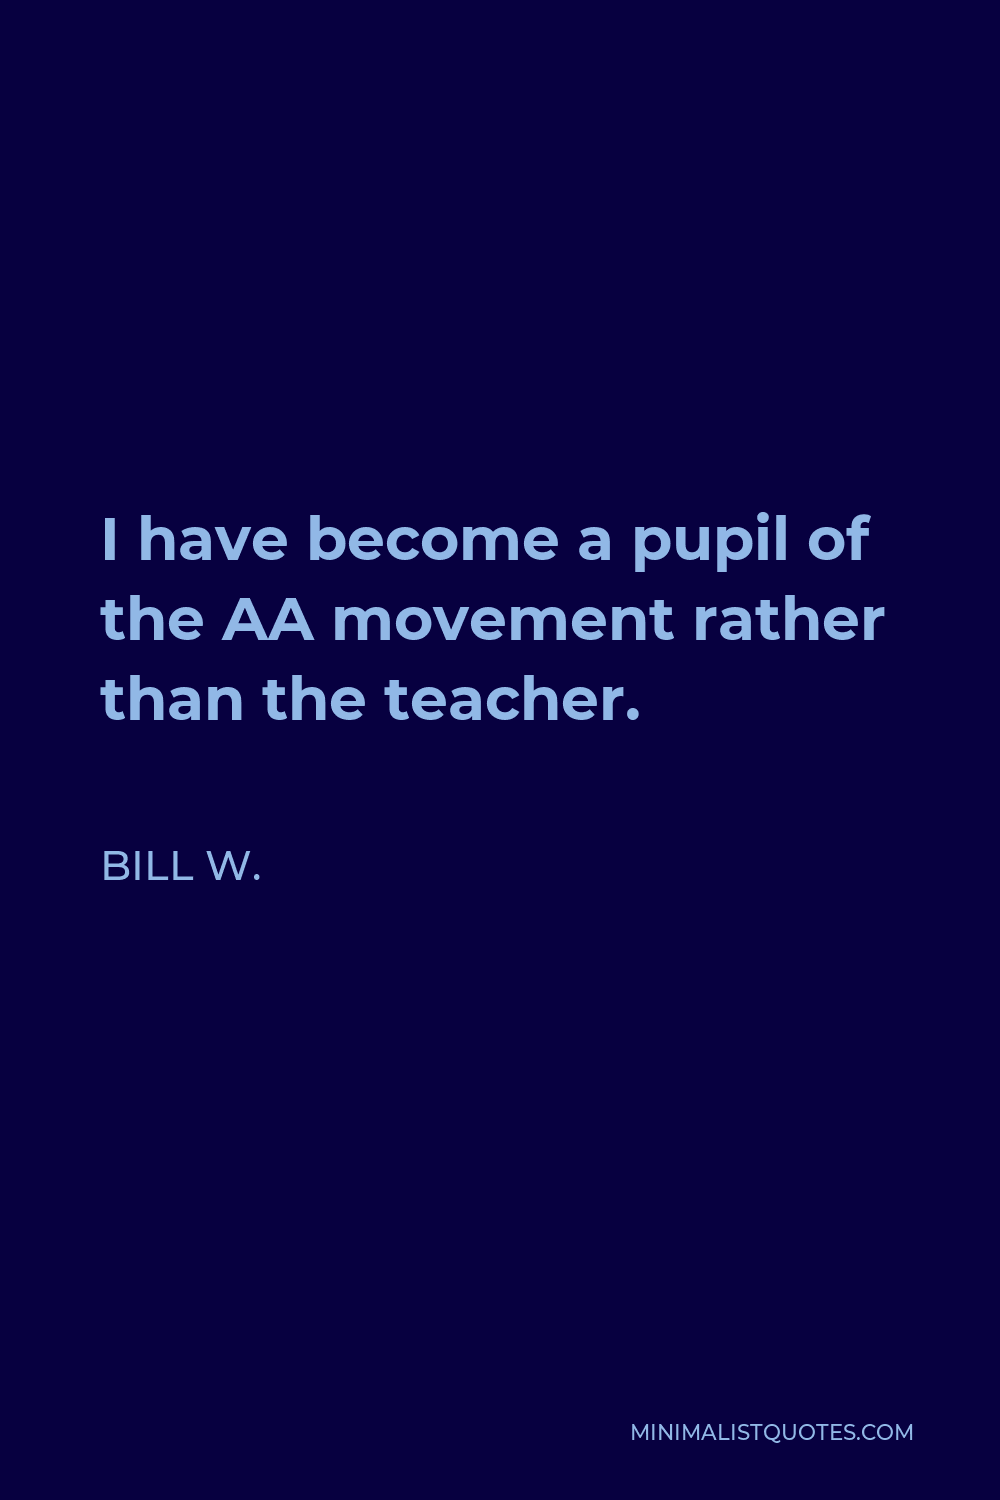 Bill W. Quote - I have become a pupil of the AA movement rather than the teacher.